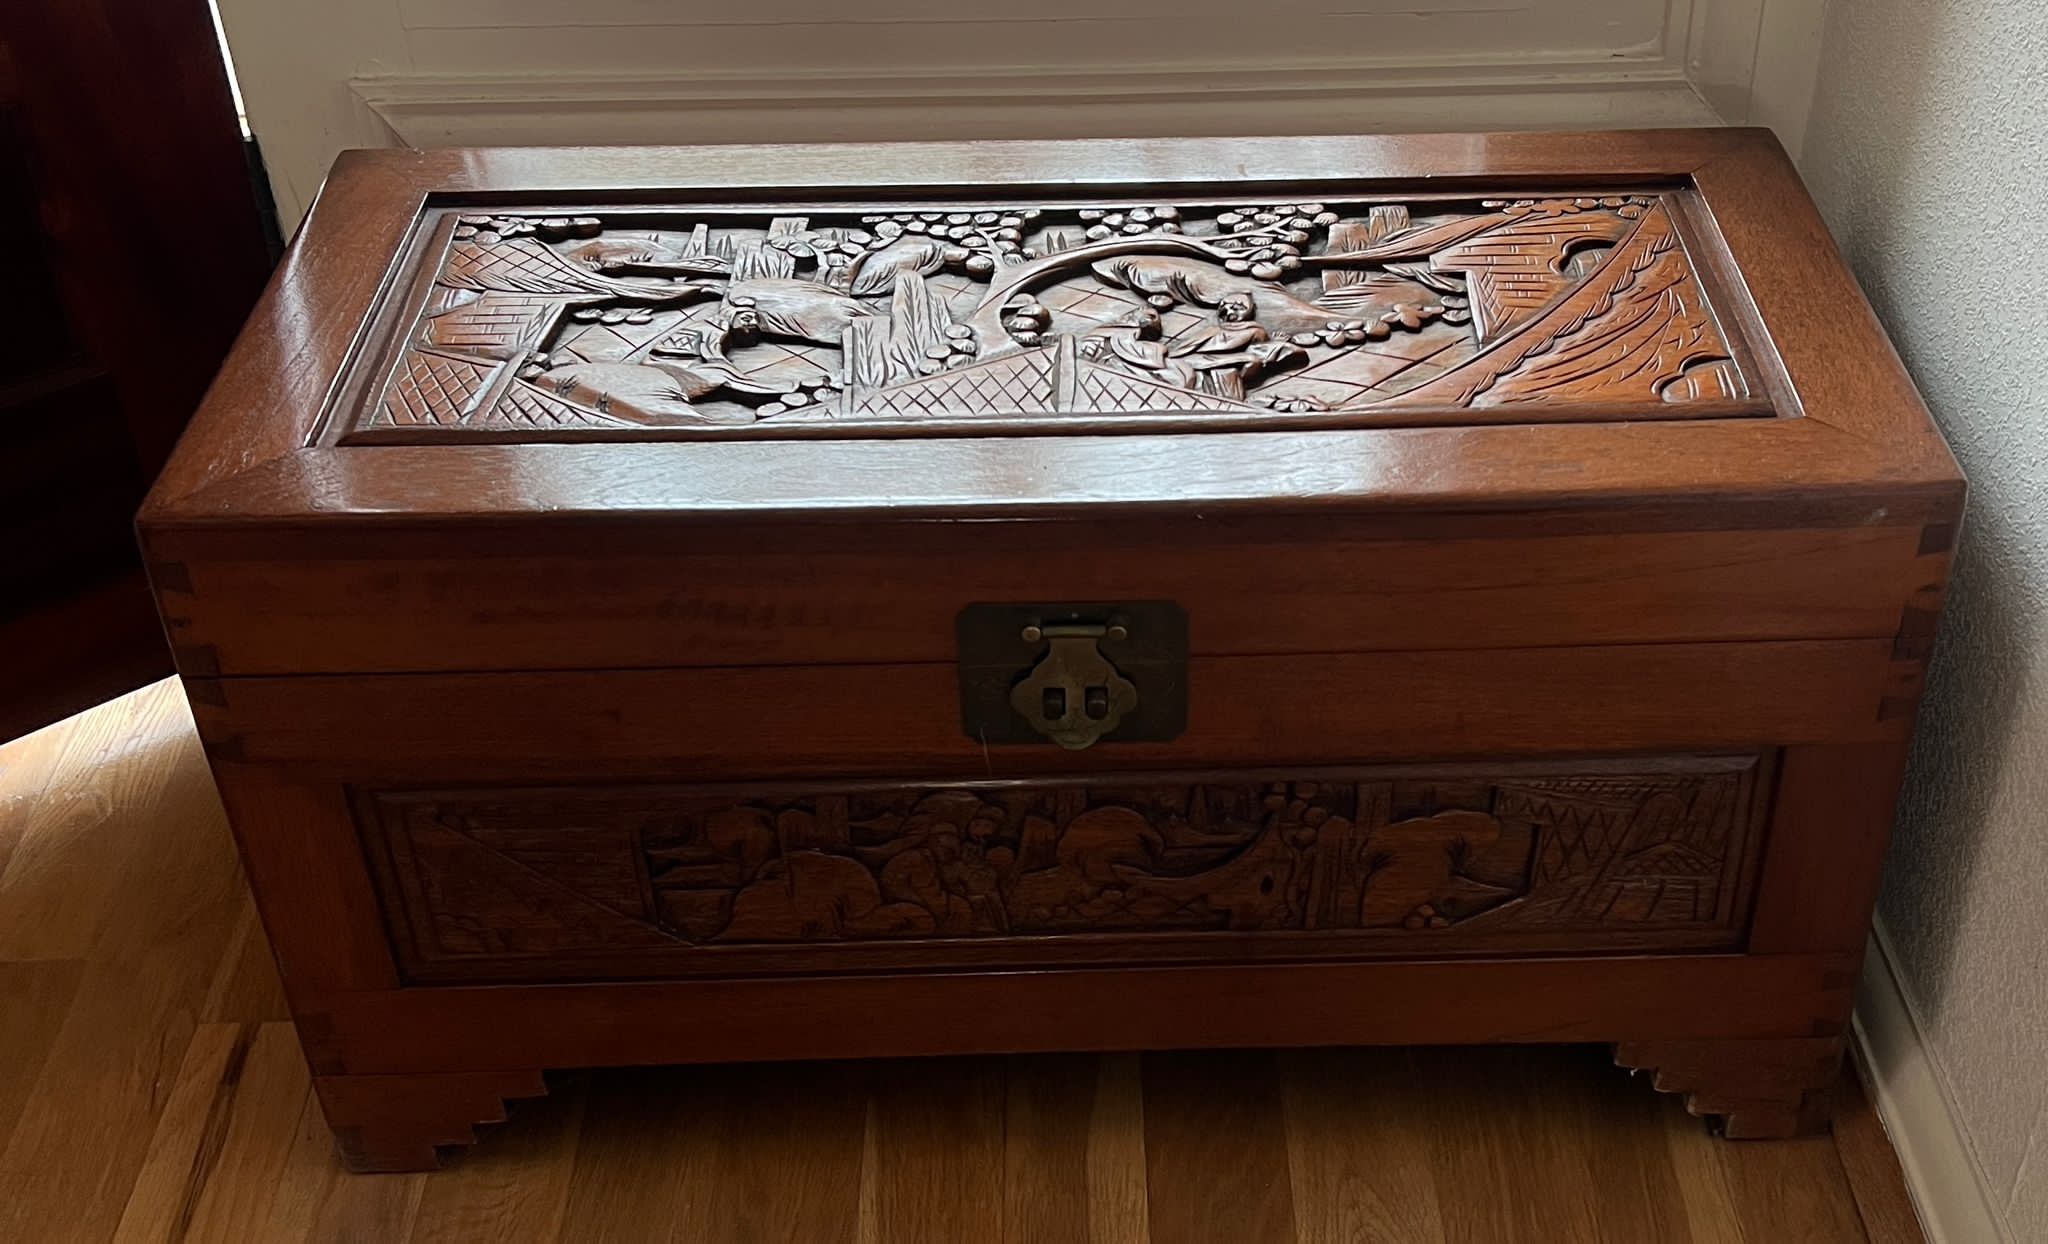 A camphor chest with brass fittings and carved pastural scene (74cm x 36cm x 40cm) - Image 7 of 7